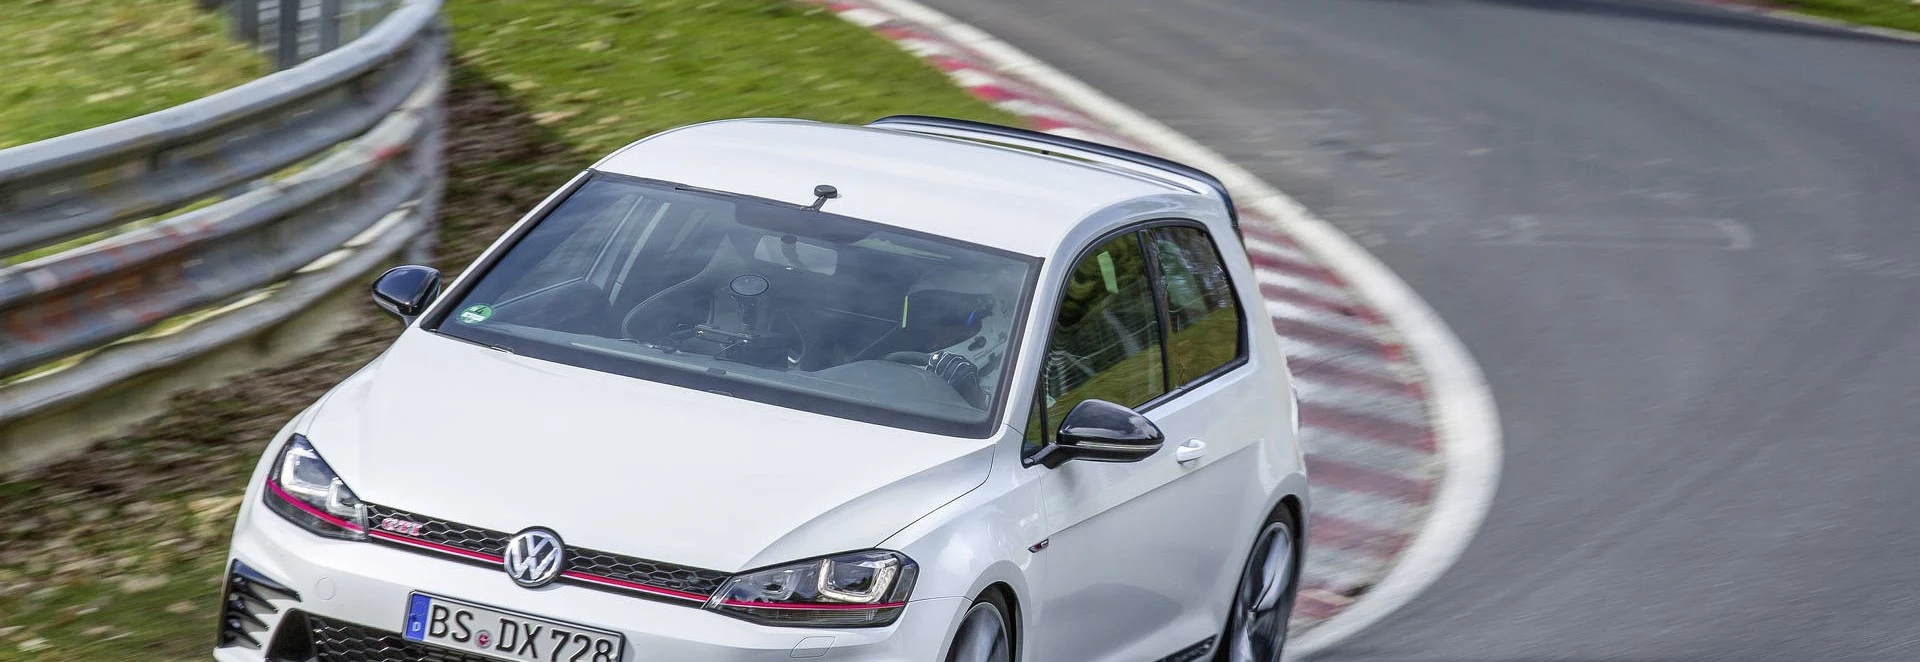 Volkswagen Golf GTI Clubsport S sets new Nurburgring record